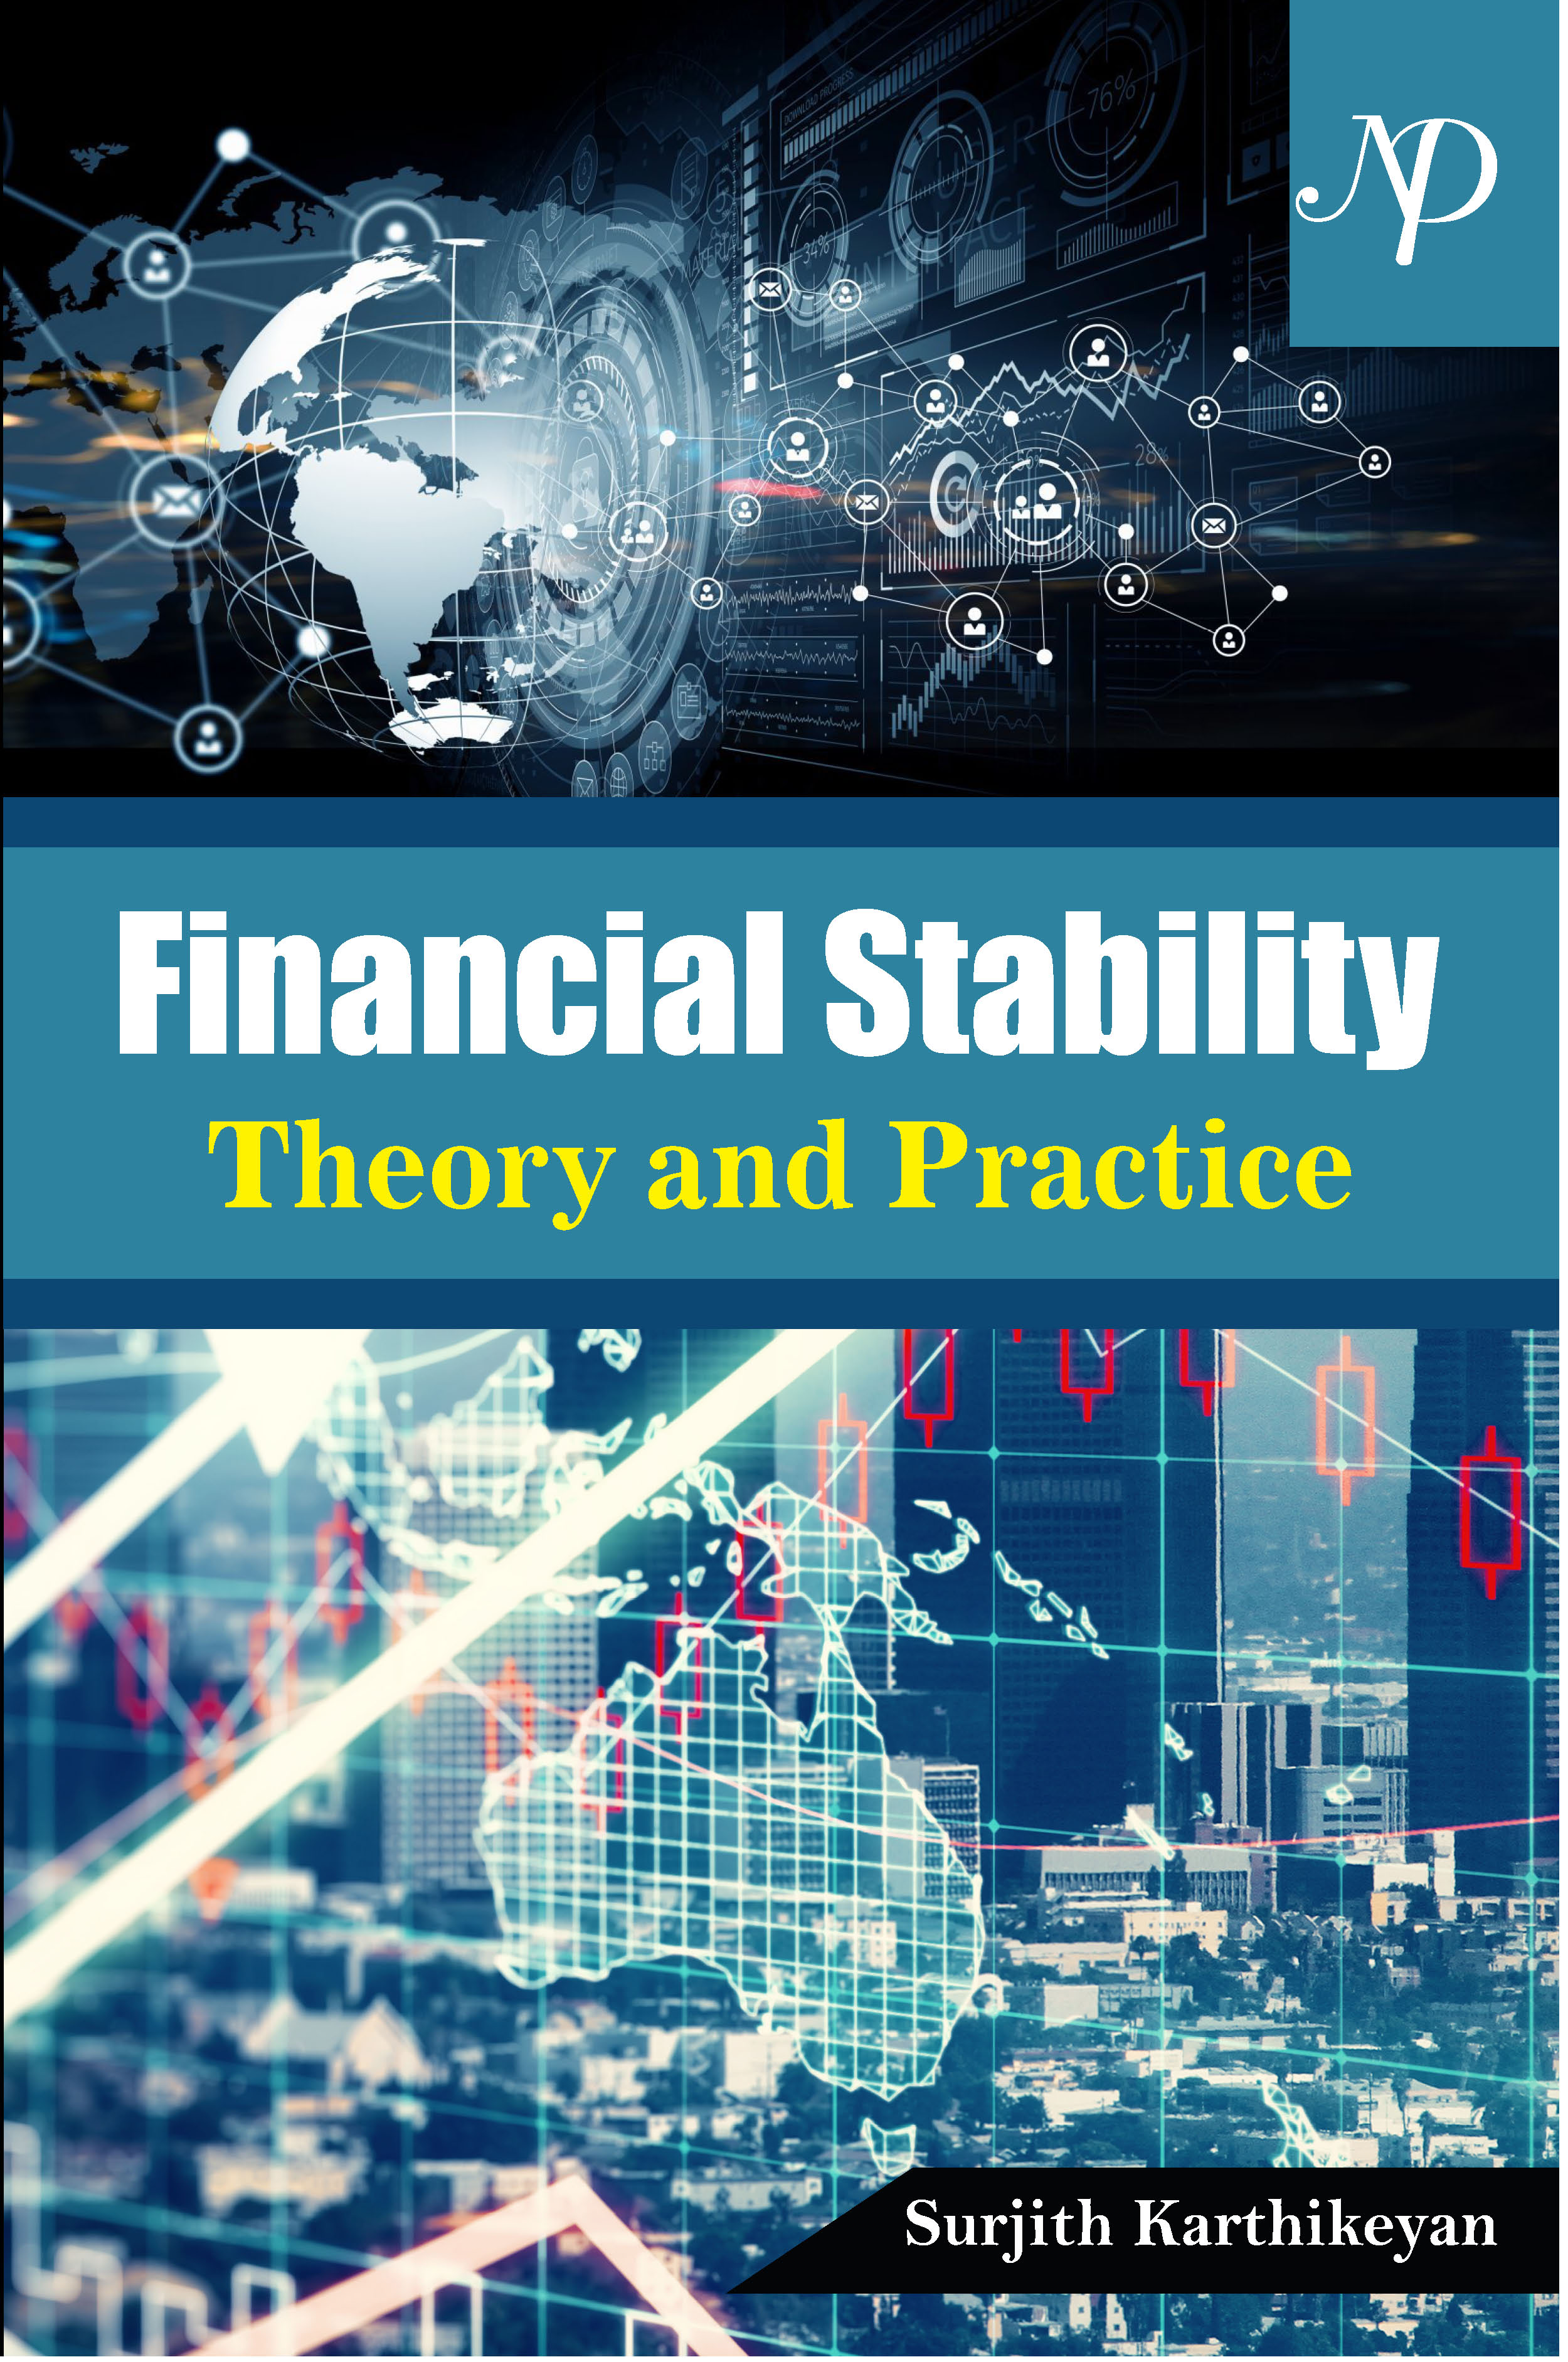 Financial Stability Theory and Practice.jpg